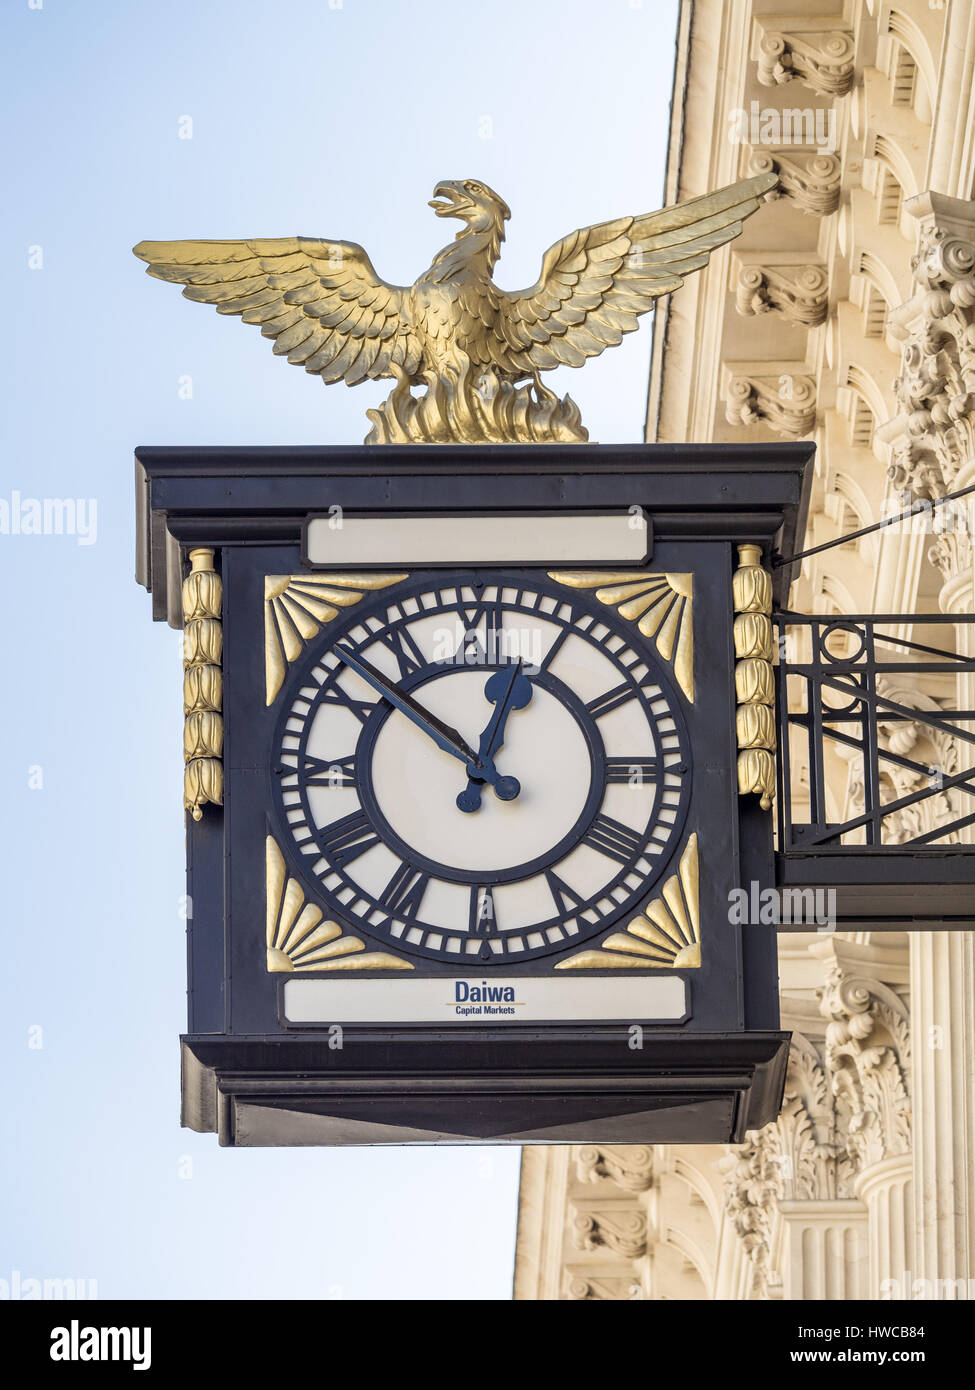 Clock outside the Daiwa Capital Markets investment bank in King William Street in London's Square Mile Financial District Stock Photo